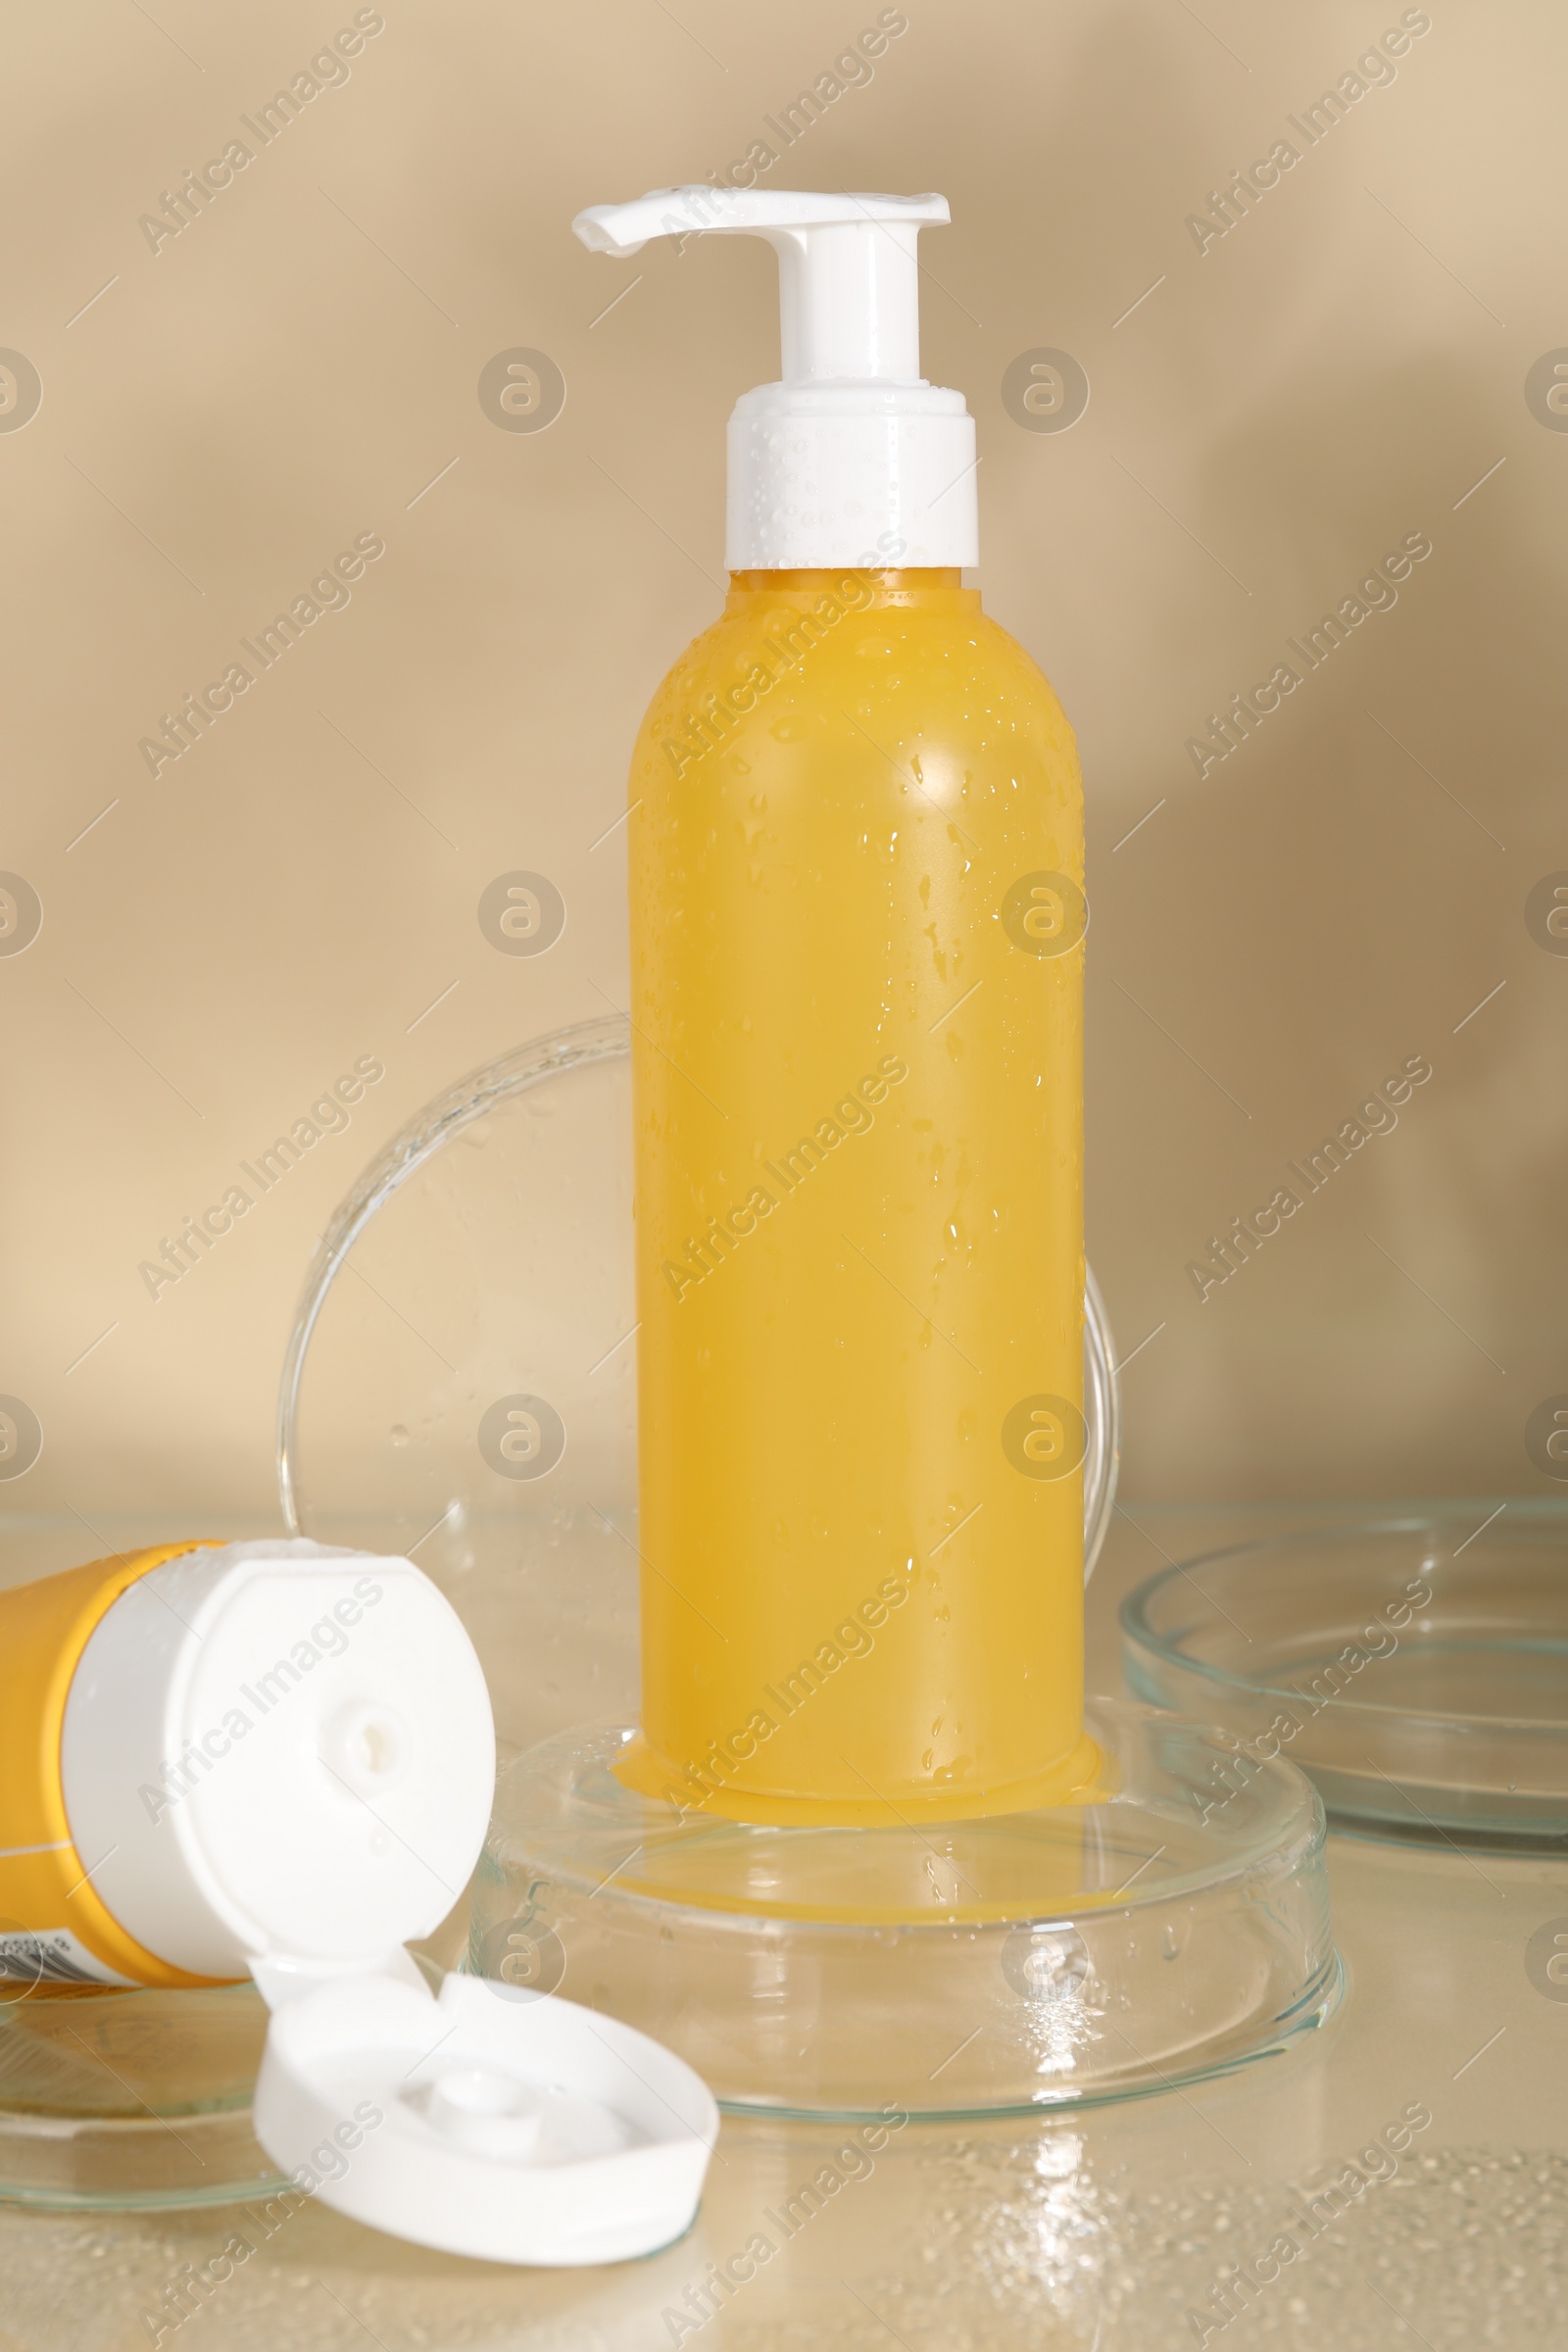 Photo of Wet face cleansing products and petri dishes on beige background